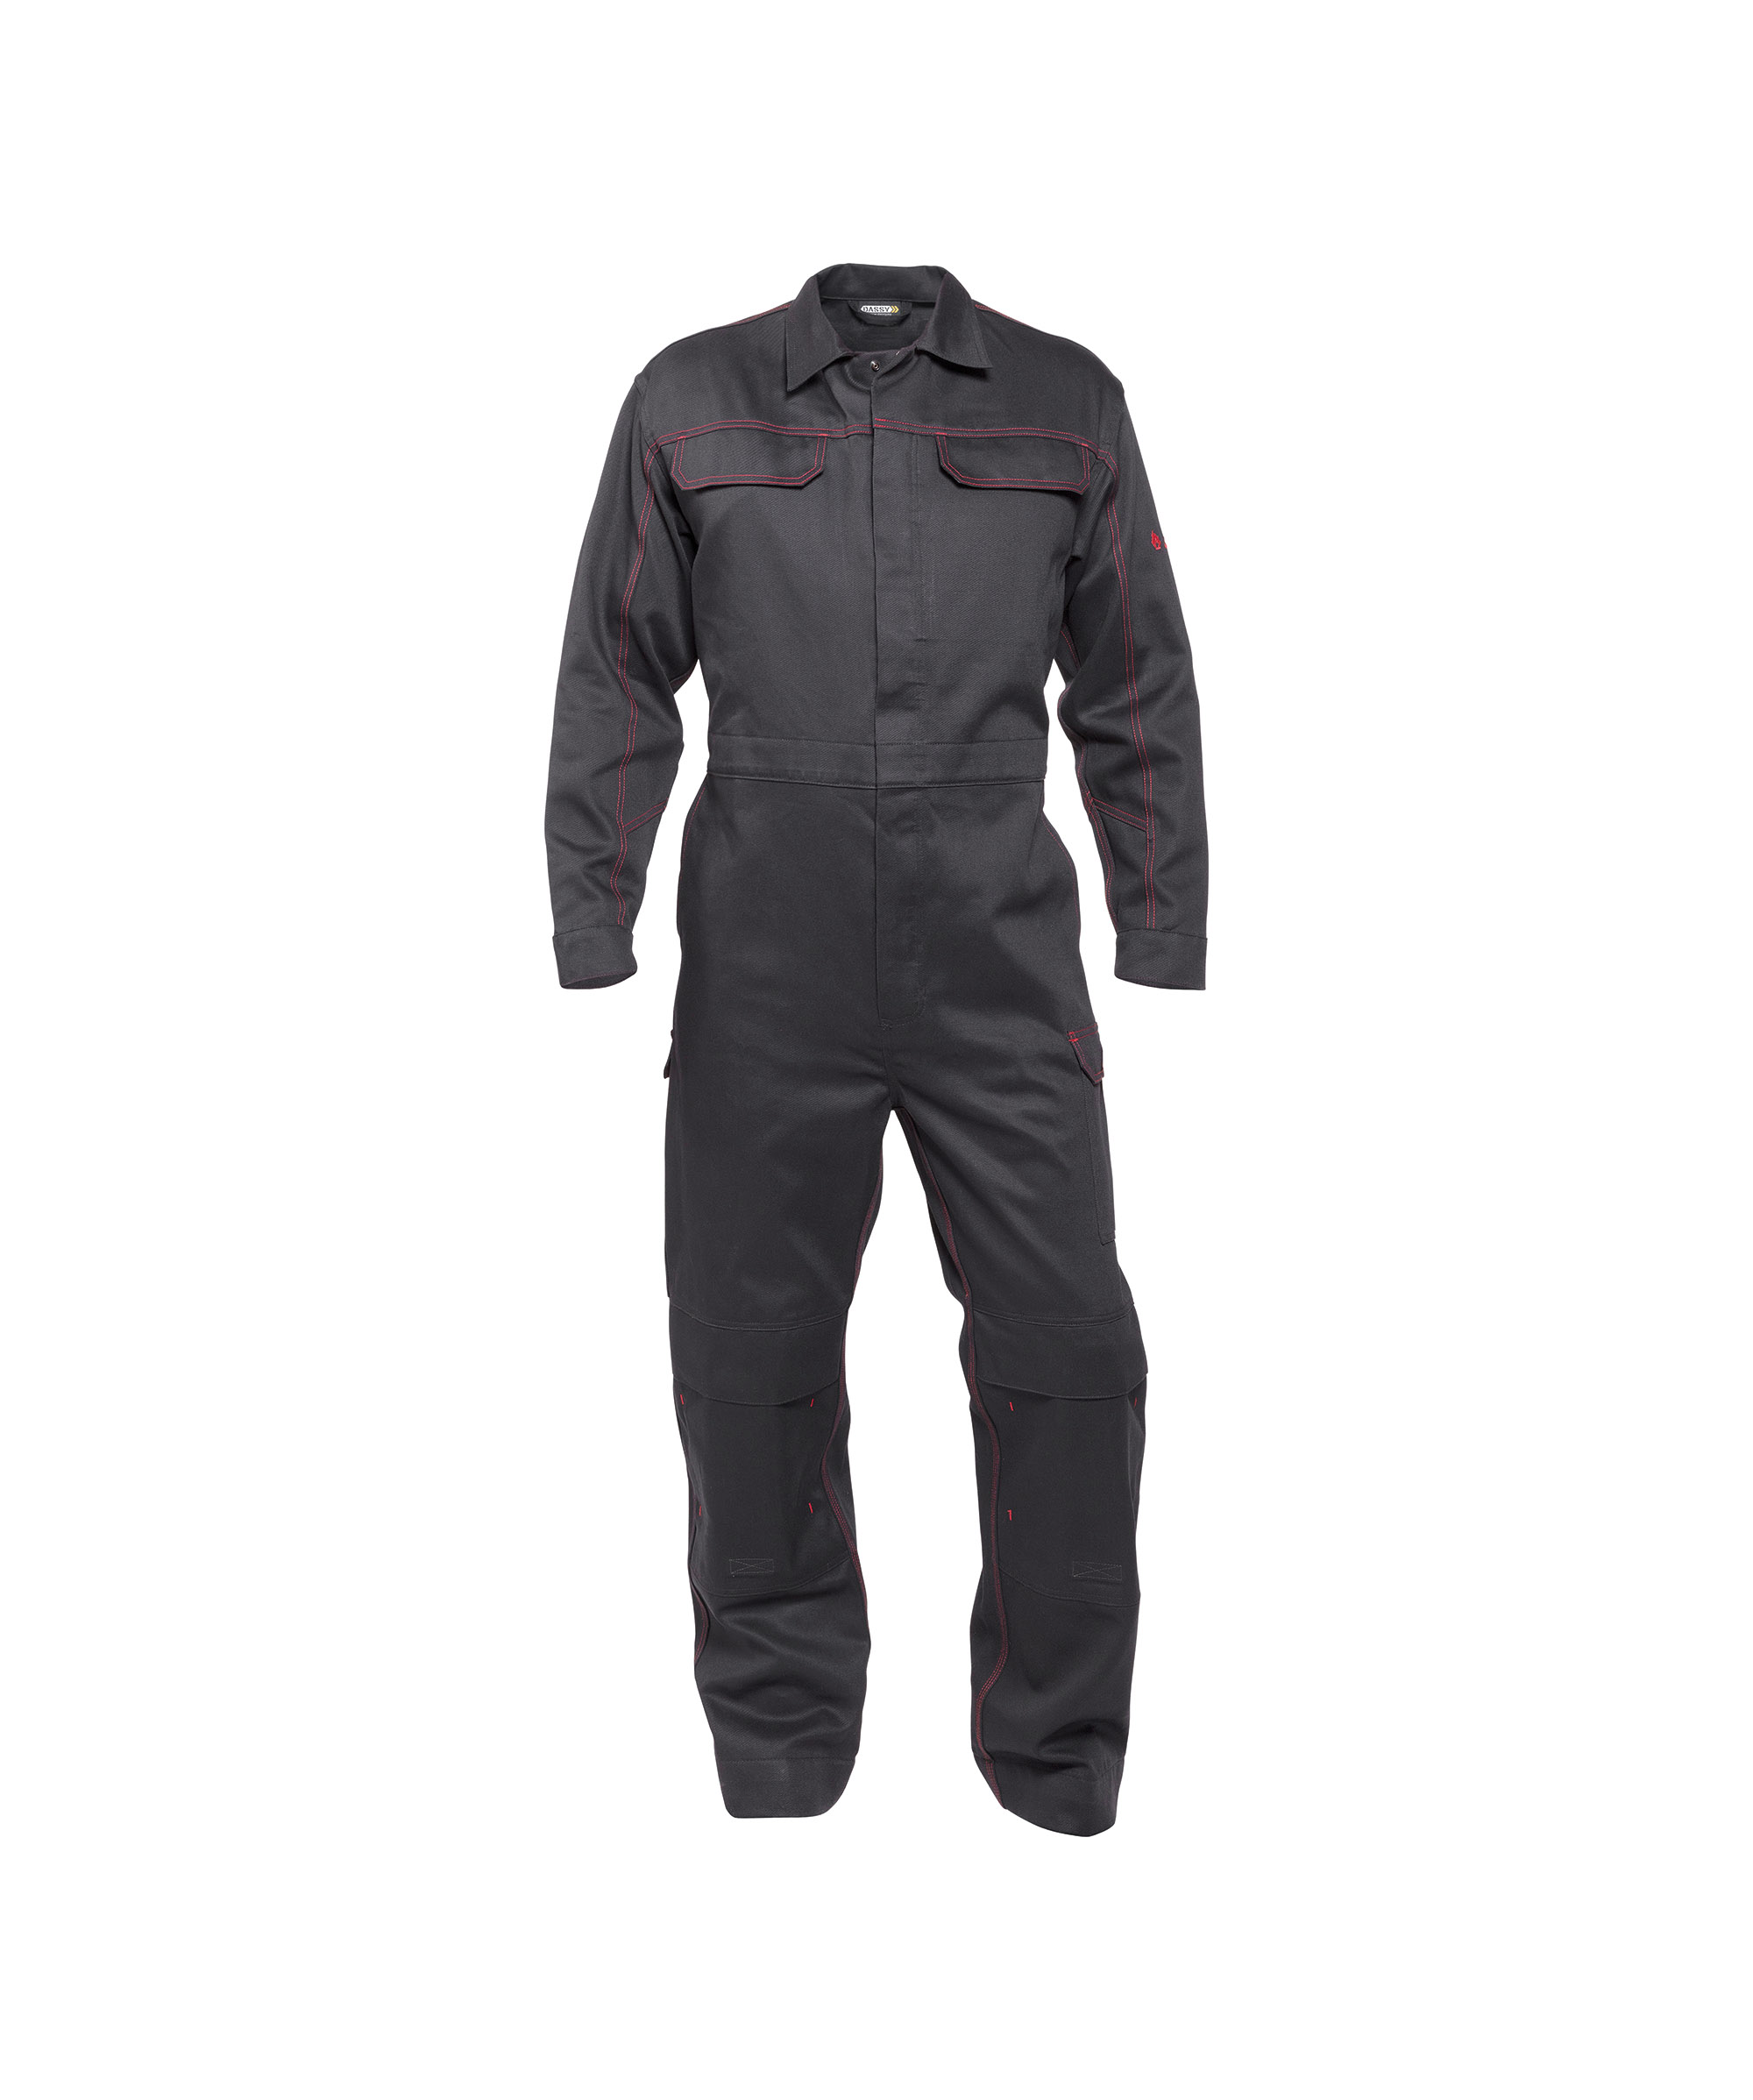 toronto_flame-retardant-overall-with-knee-pockets_black_front.jpg